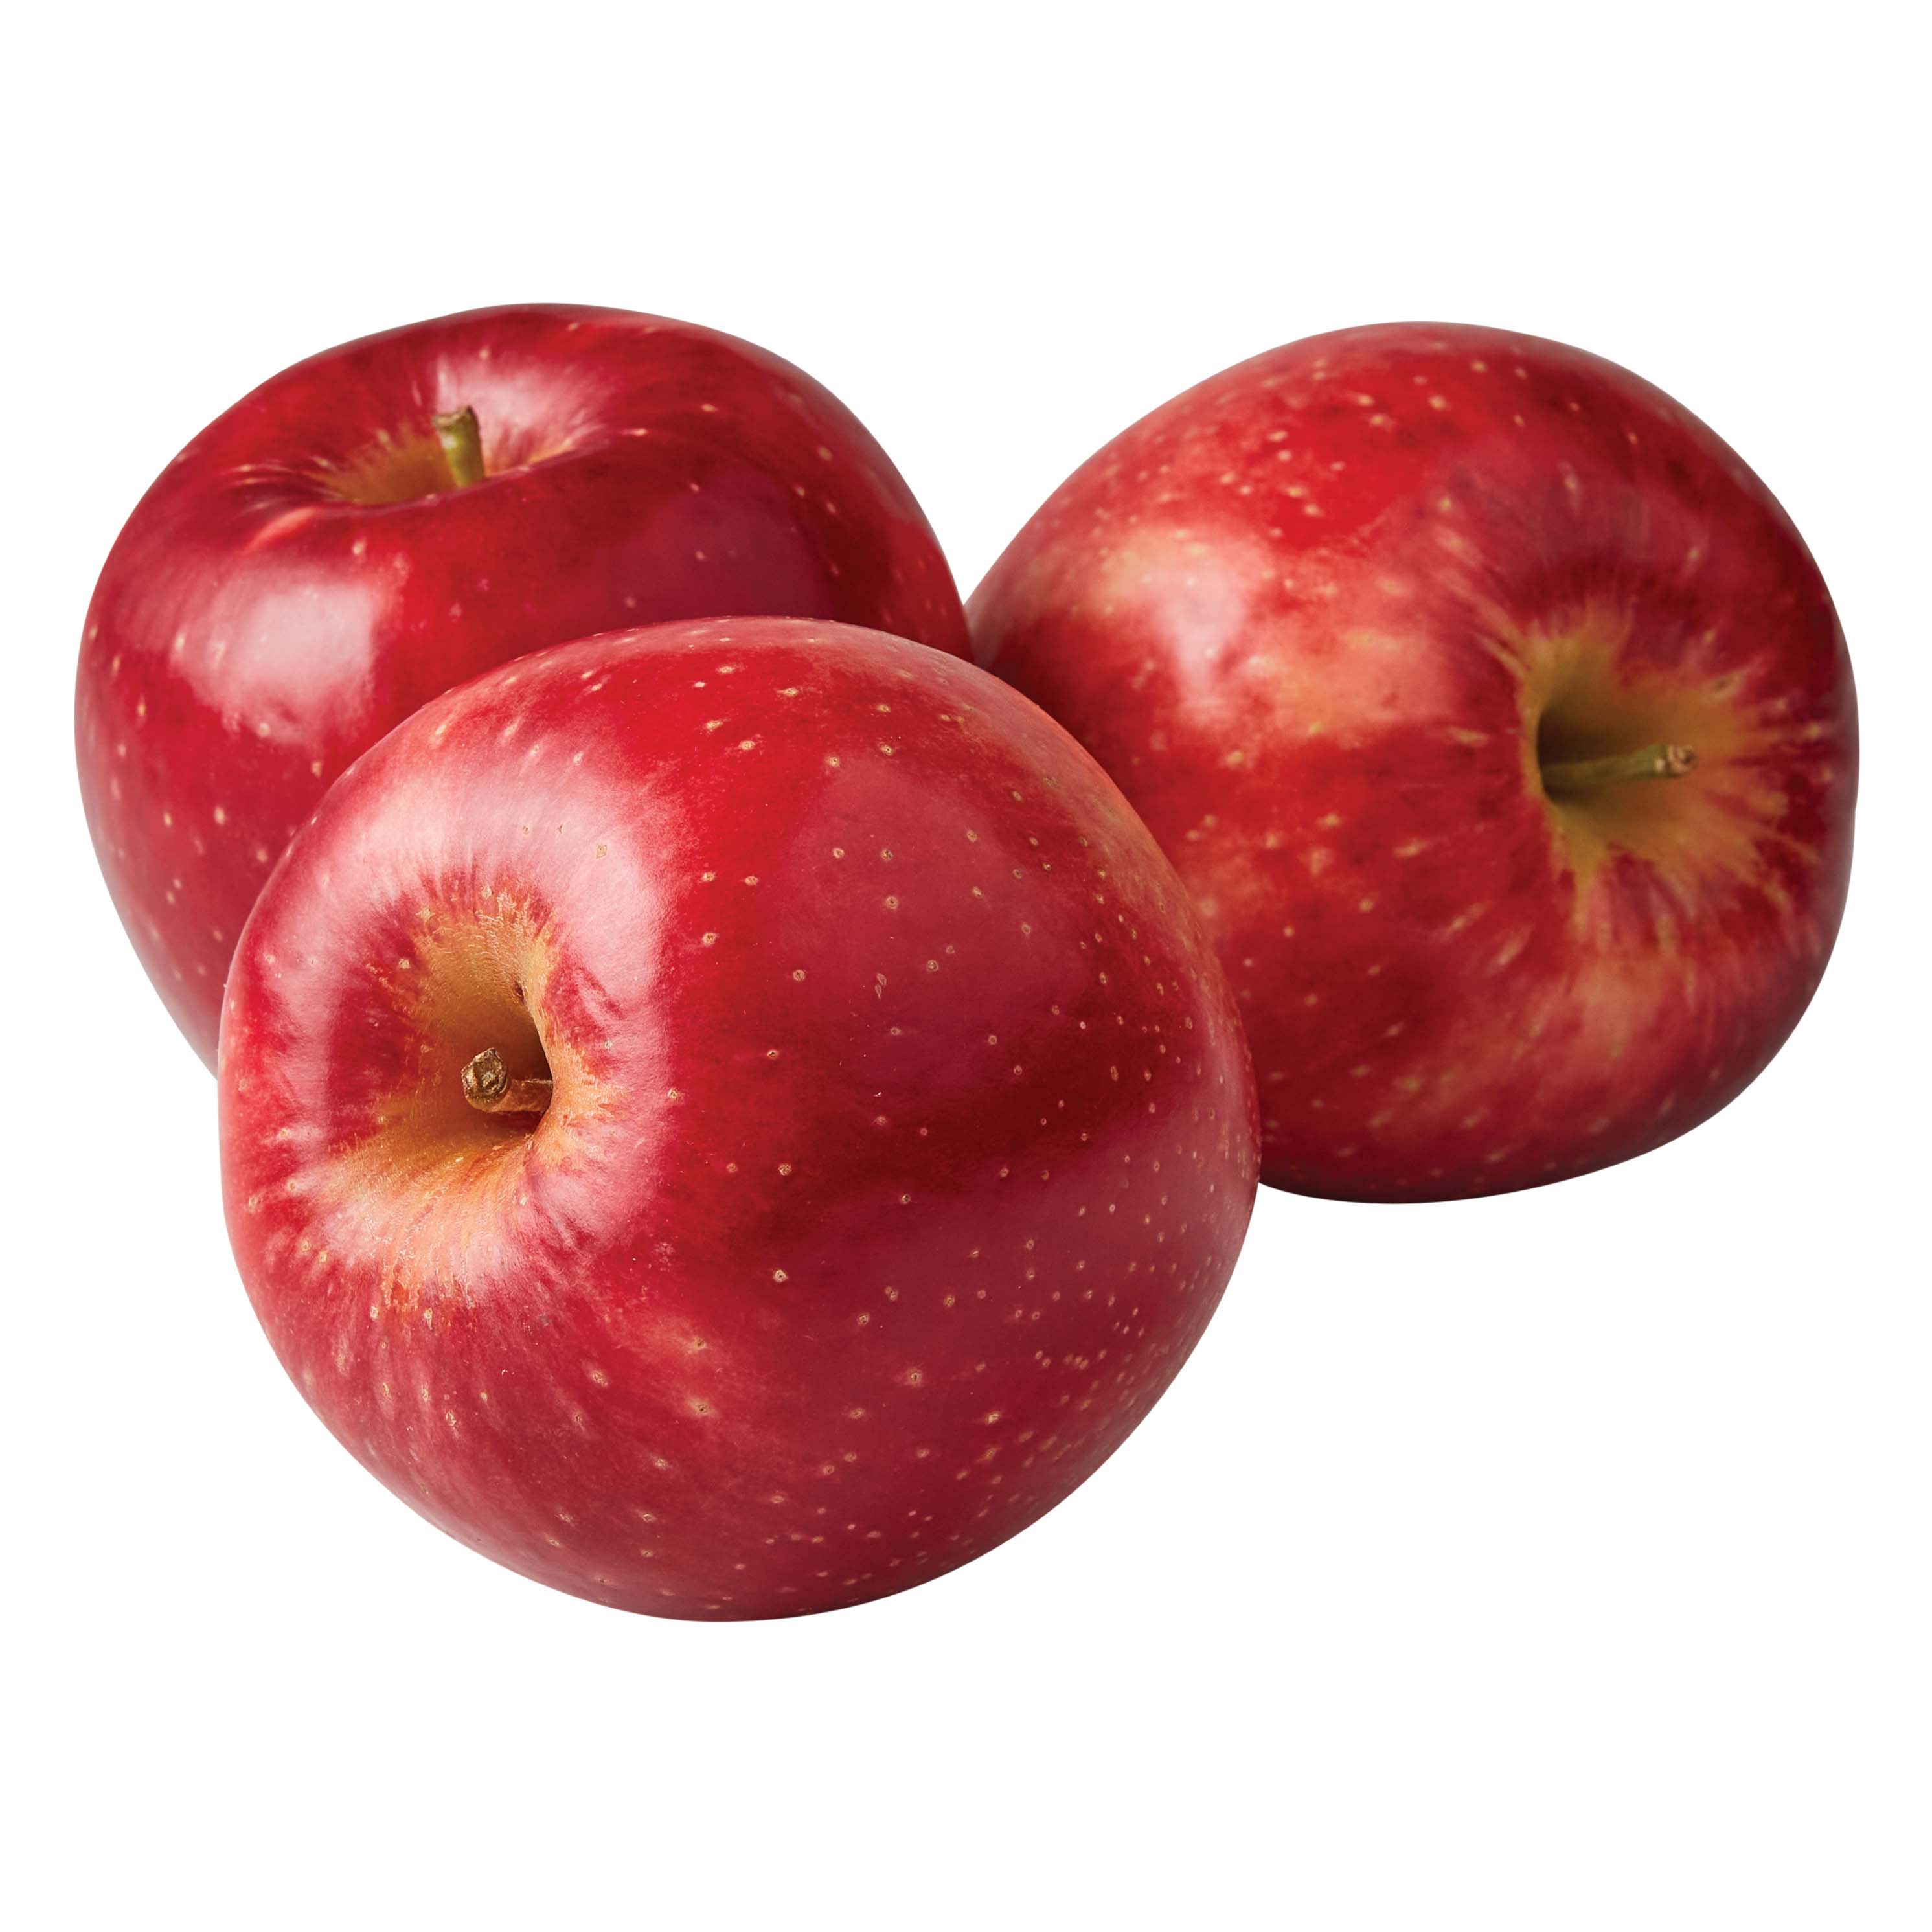 Fresh Bagged Sweetie Apples - Shop Apples at H-E-B